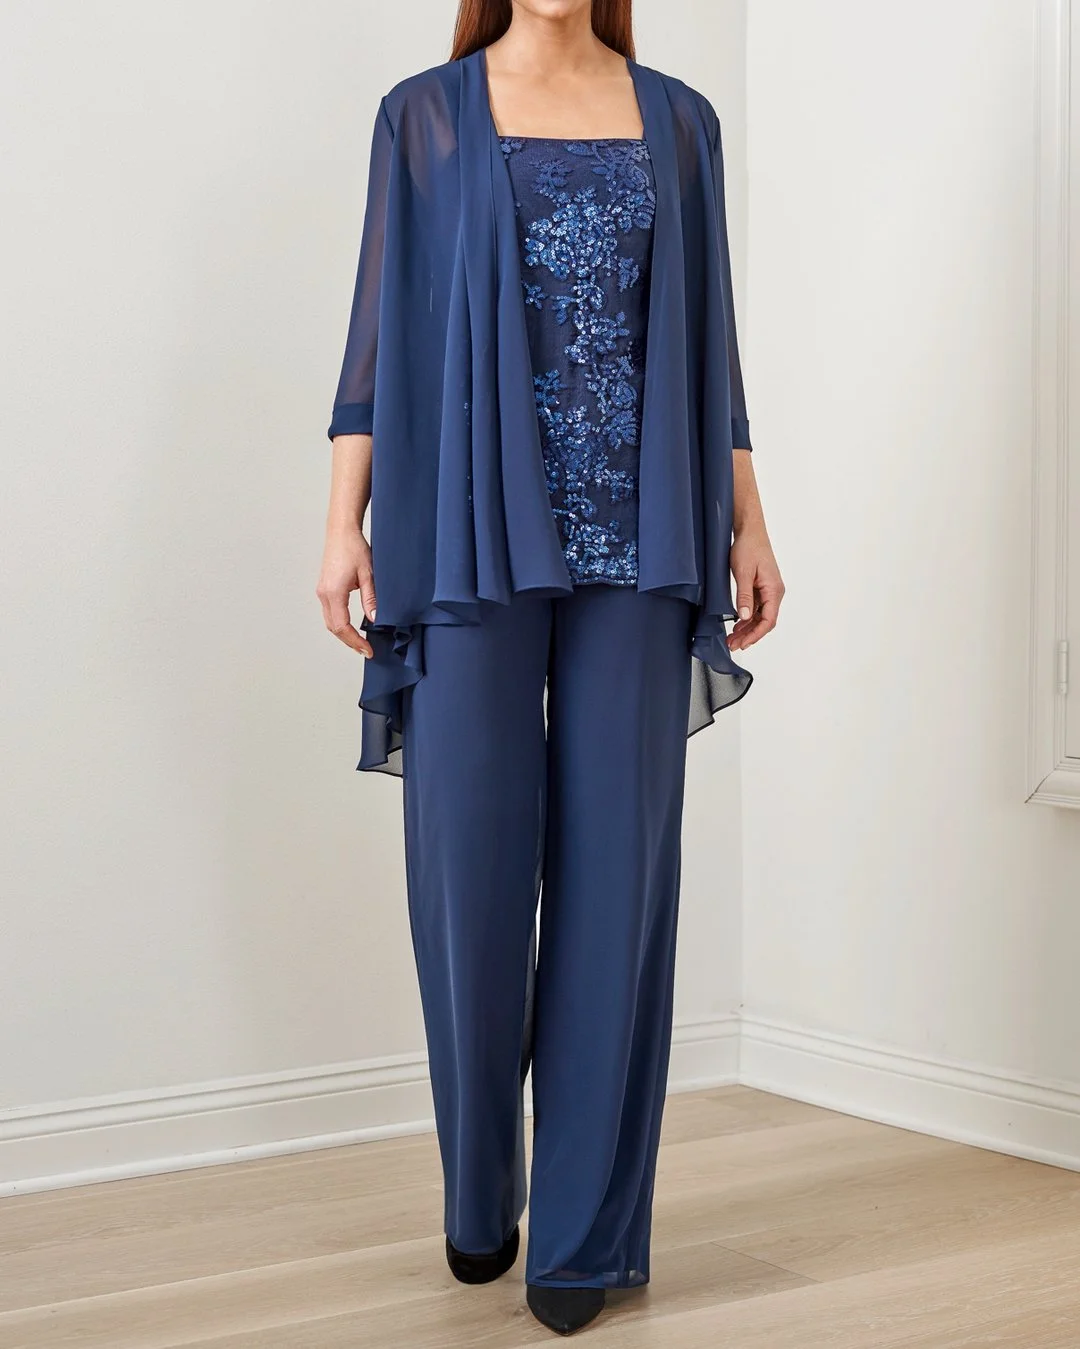 Embroidered Top Chiffon Long Pants Three Piece Suits